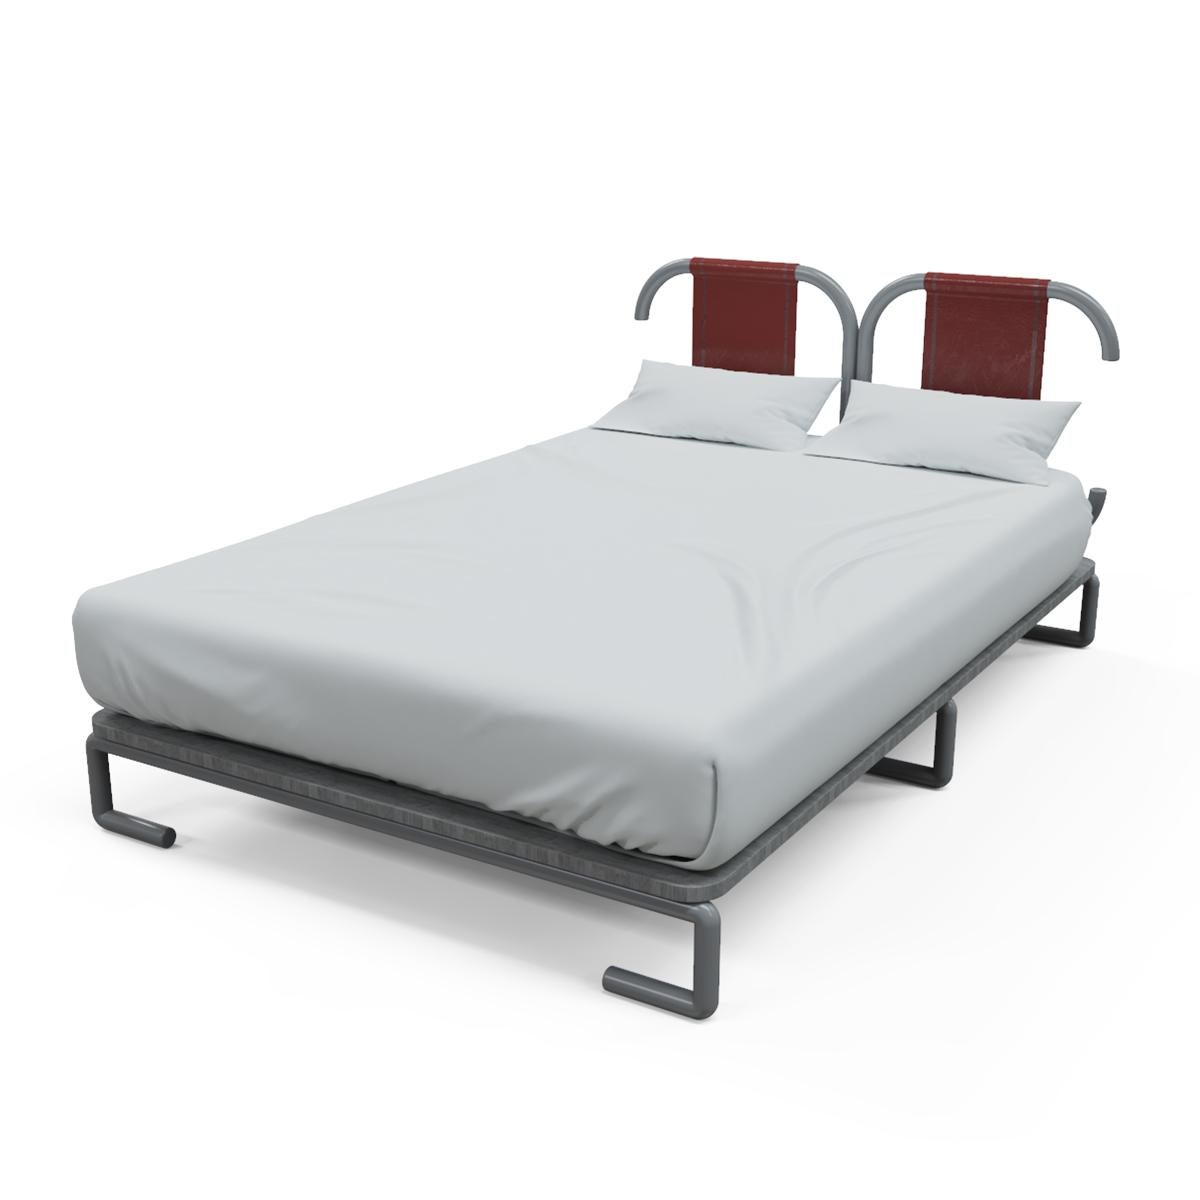 Dreaming won’t be an issue here! The steel bed frame features a sleek gray finish with accents of leather to polish off the look. With clean-cut legs that round off when they meet the floor, you won’t have any trouble counting sheep long into the